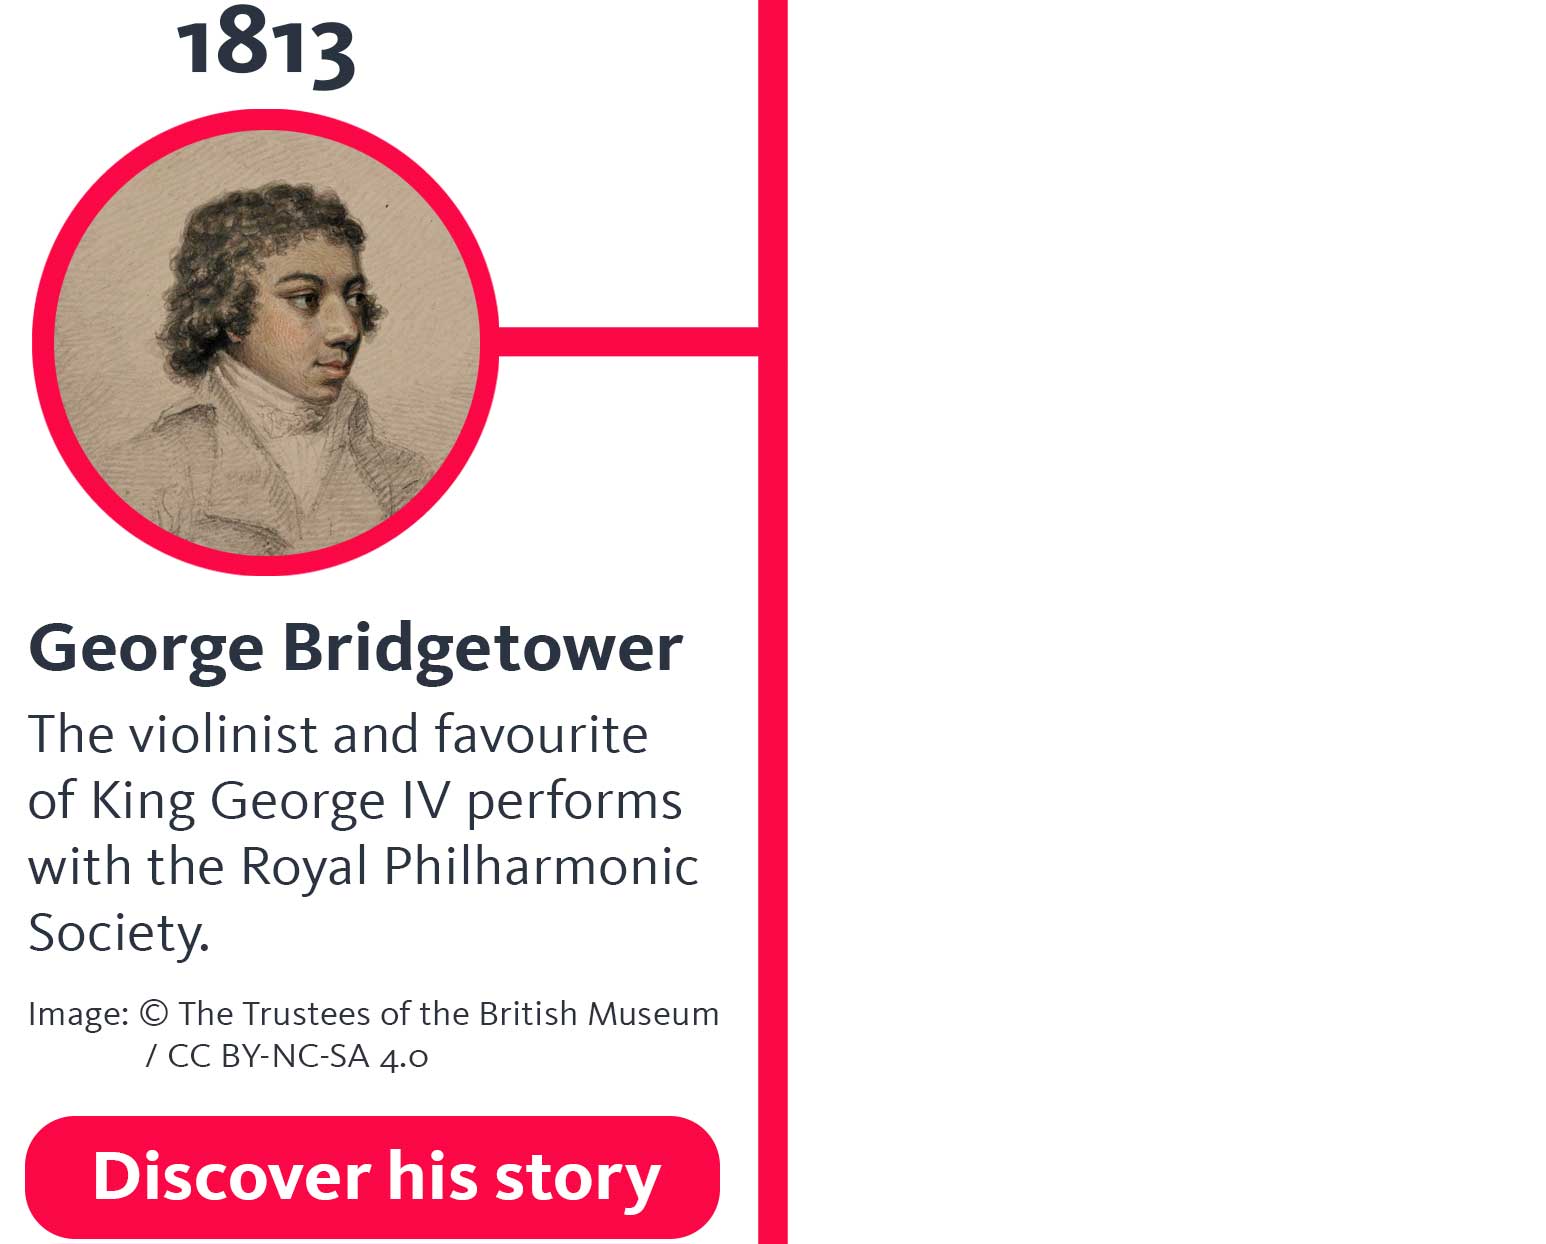 The year '1813' appears above a sketch of a young man, and the caption 'George Bridgetower', and text below that says 'The violinist and favourite of King George IV performs with the Royal Philharmonic Society.' and below that, 'Image © The Trustees of the British Musum / CC BY-NC-SA 4.0', and a button says 'Discover his story'.